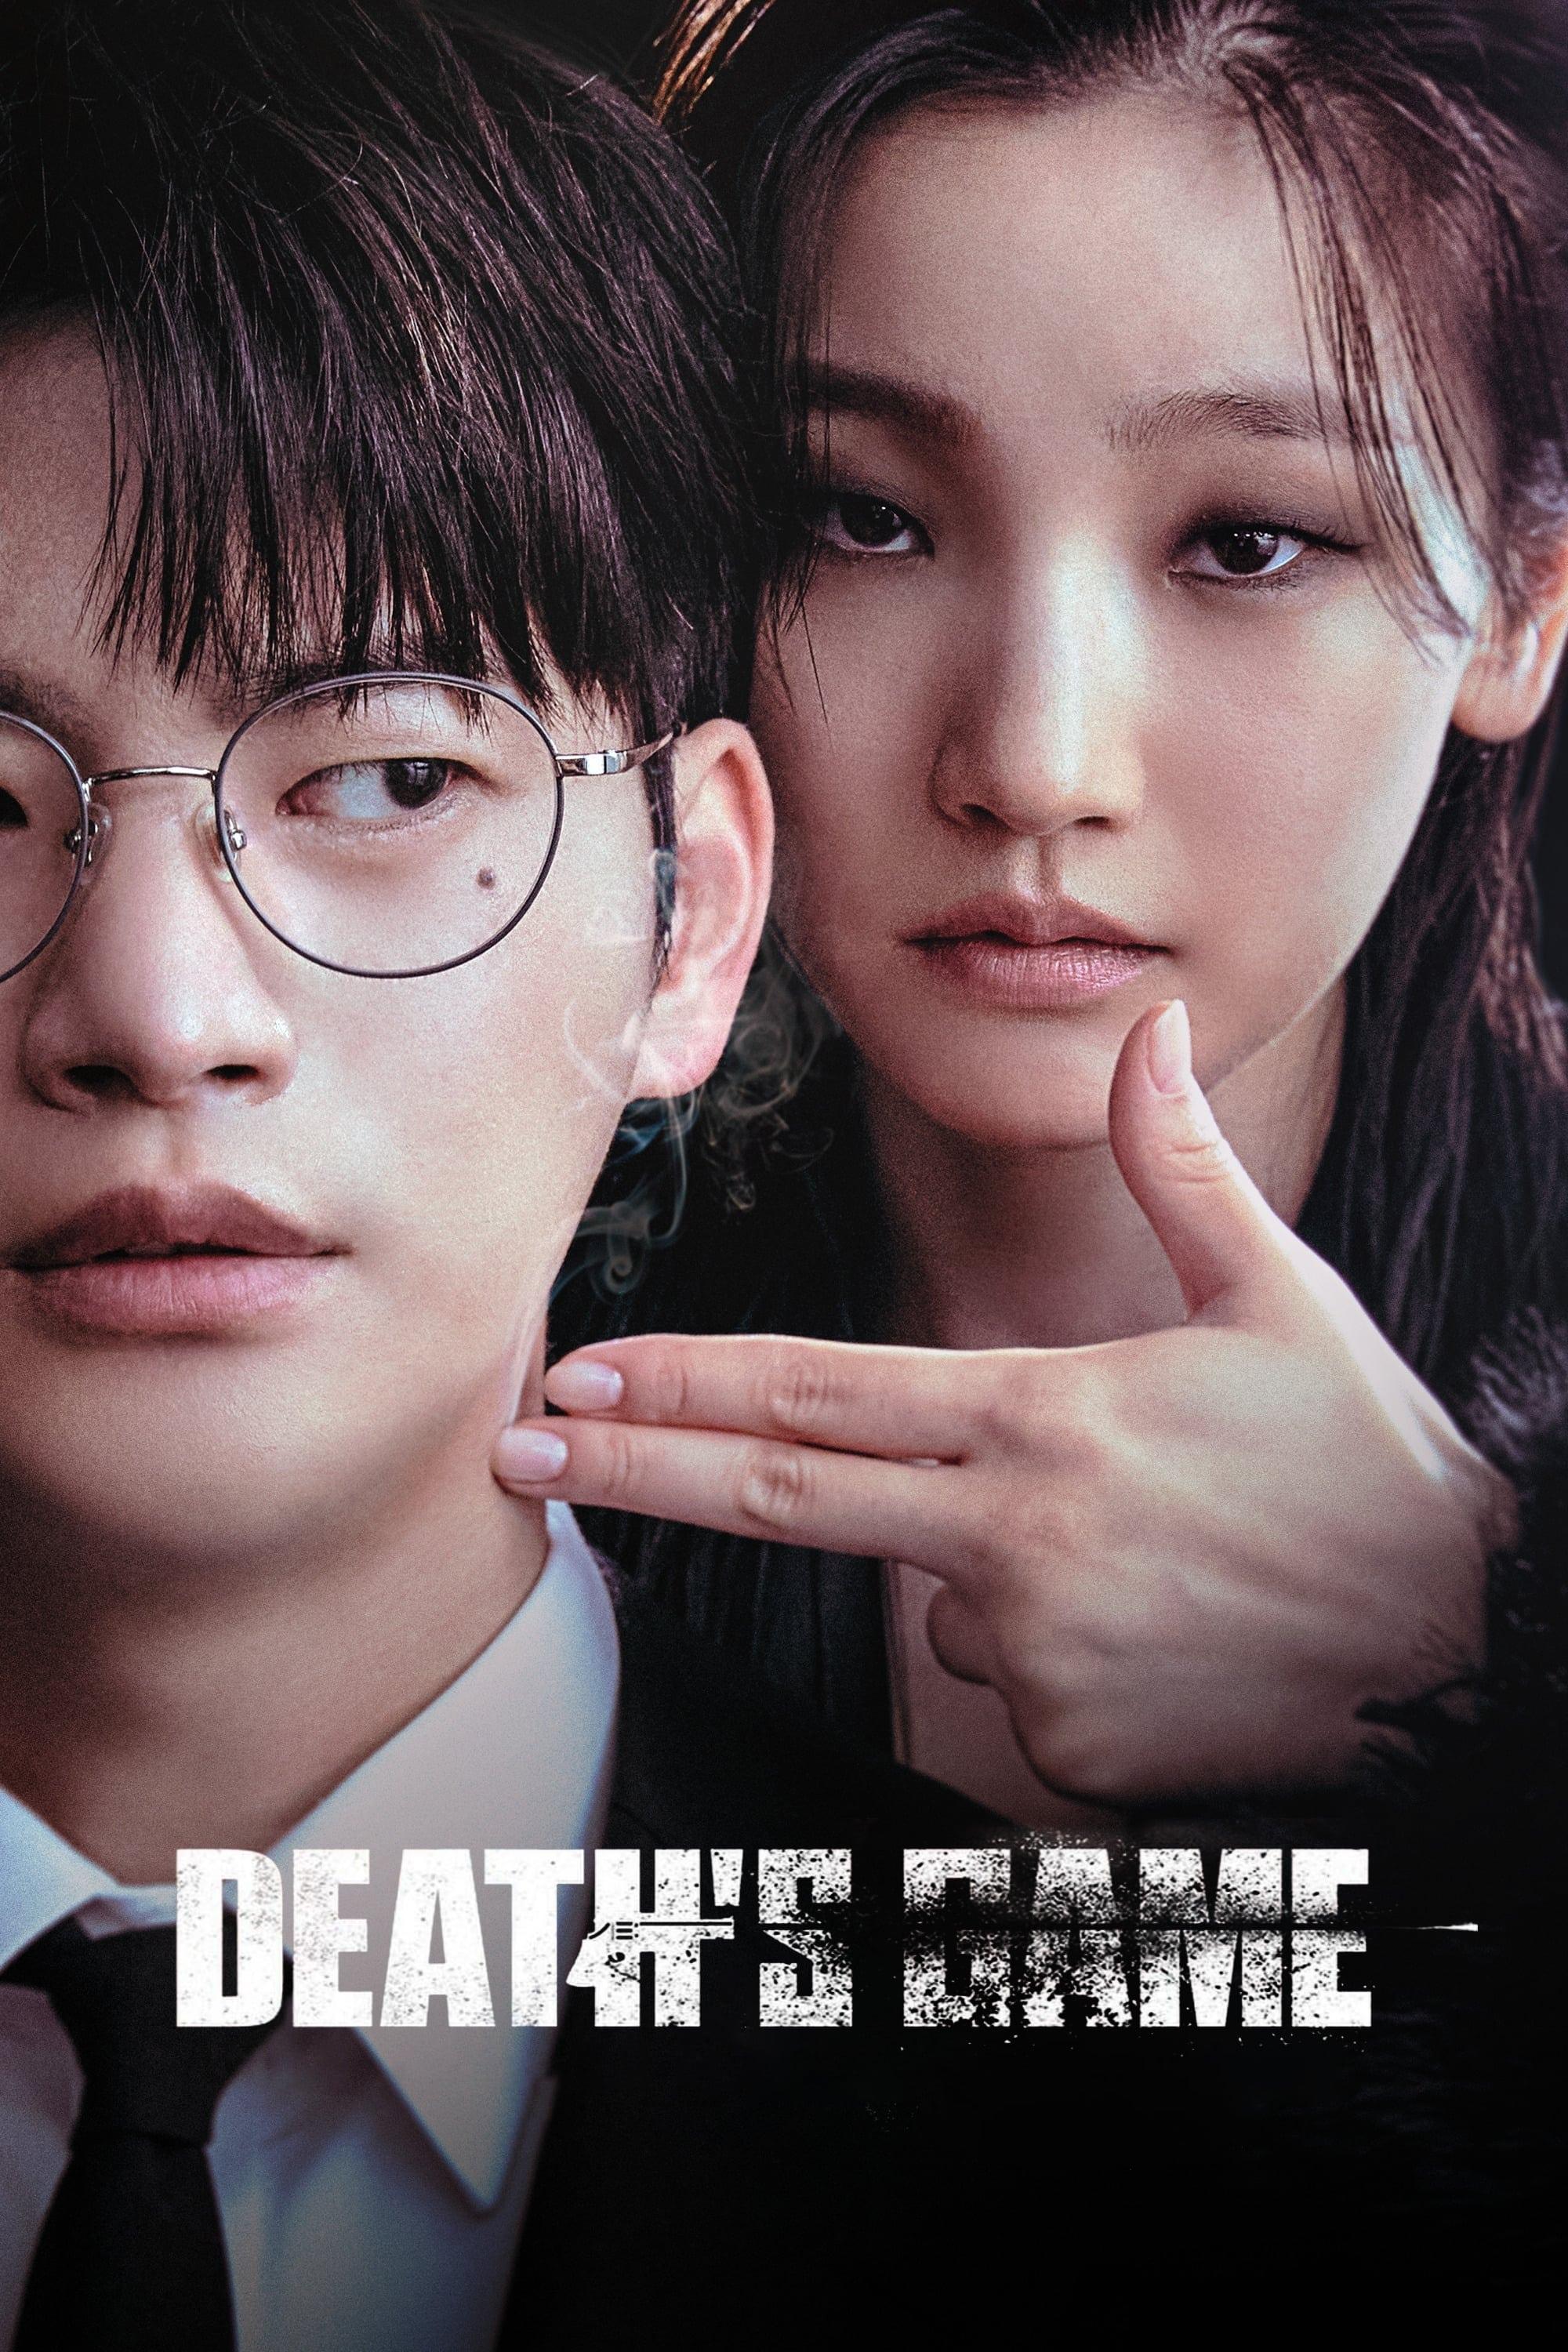 Death's Game poster